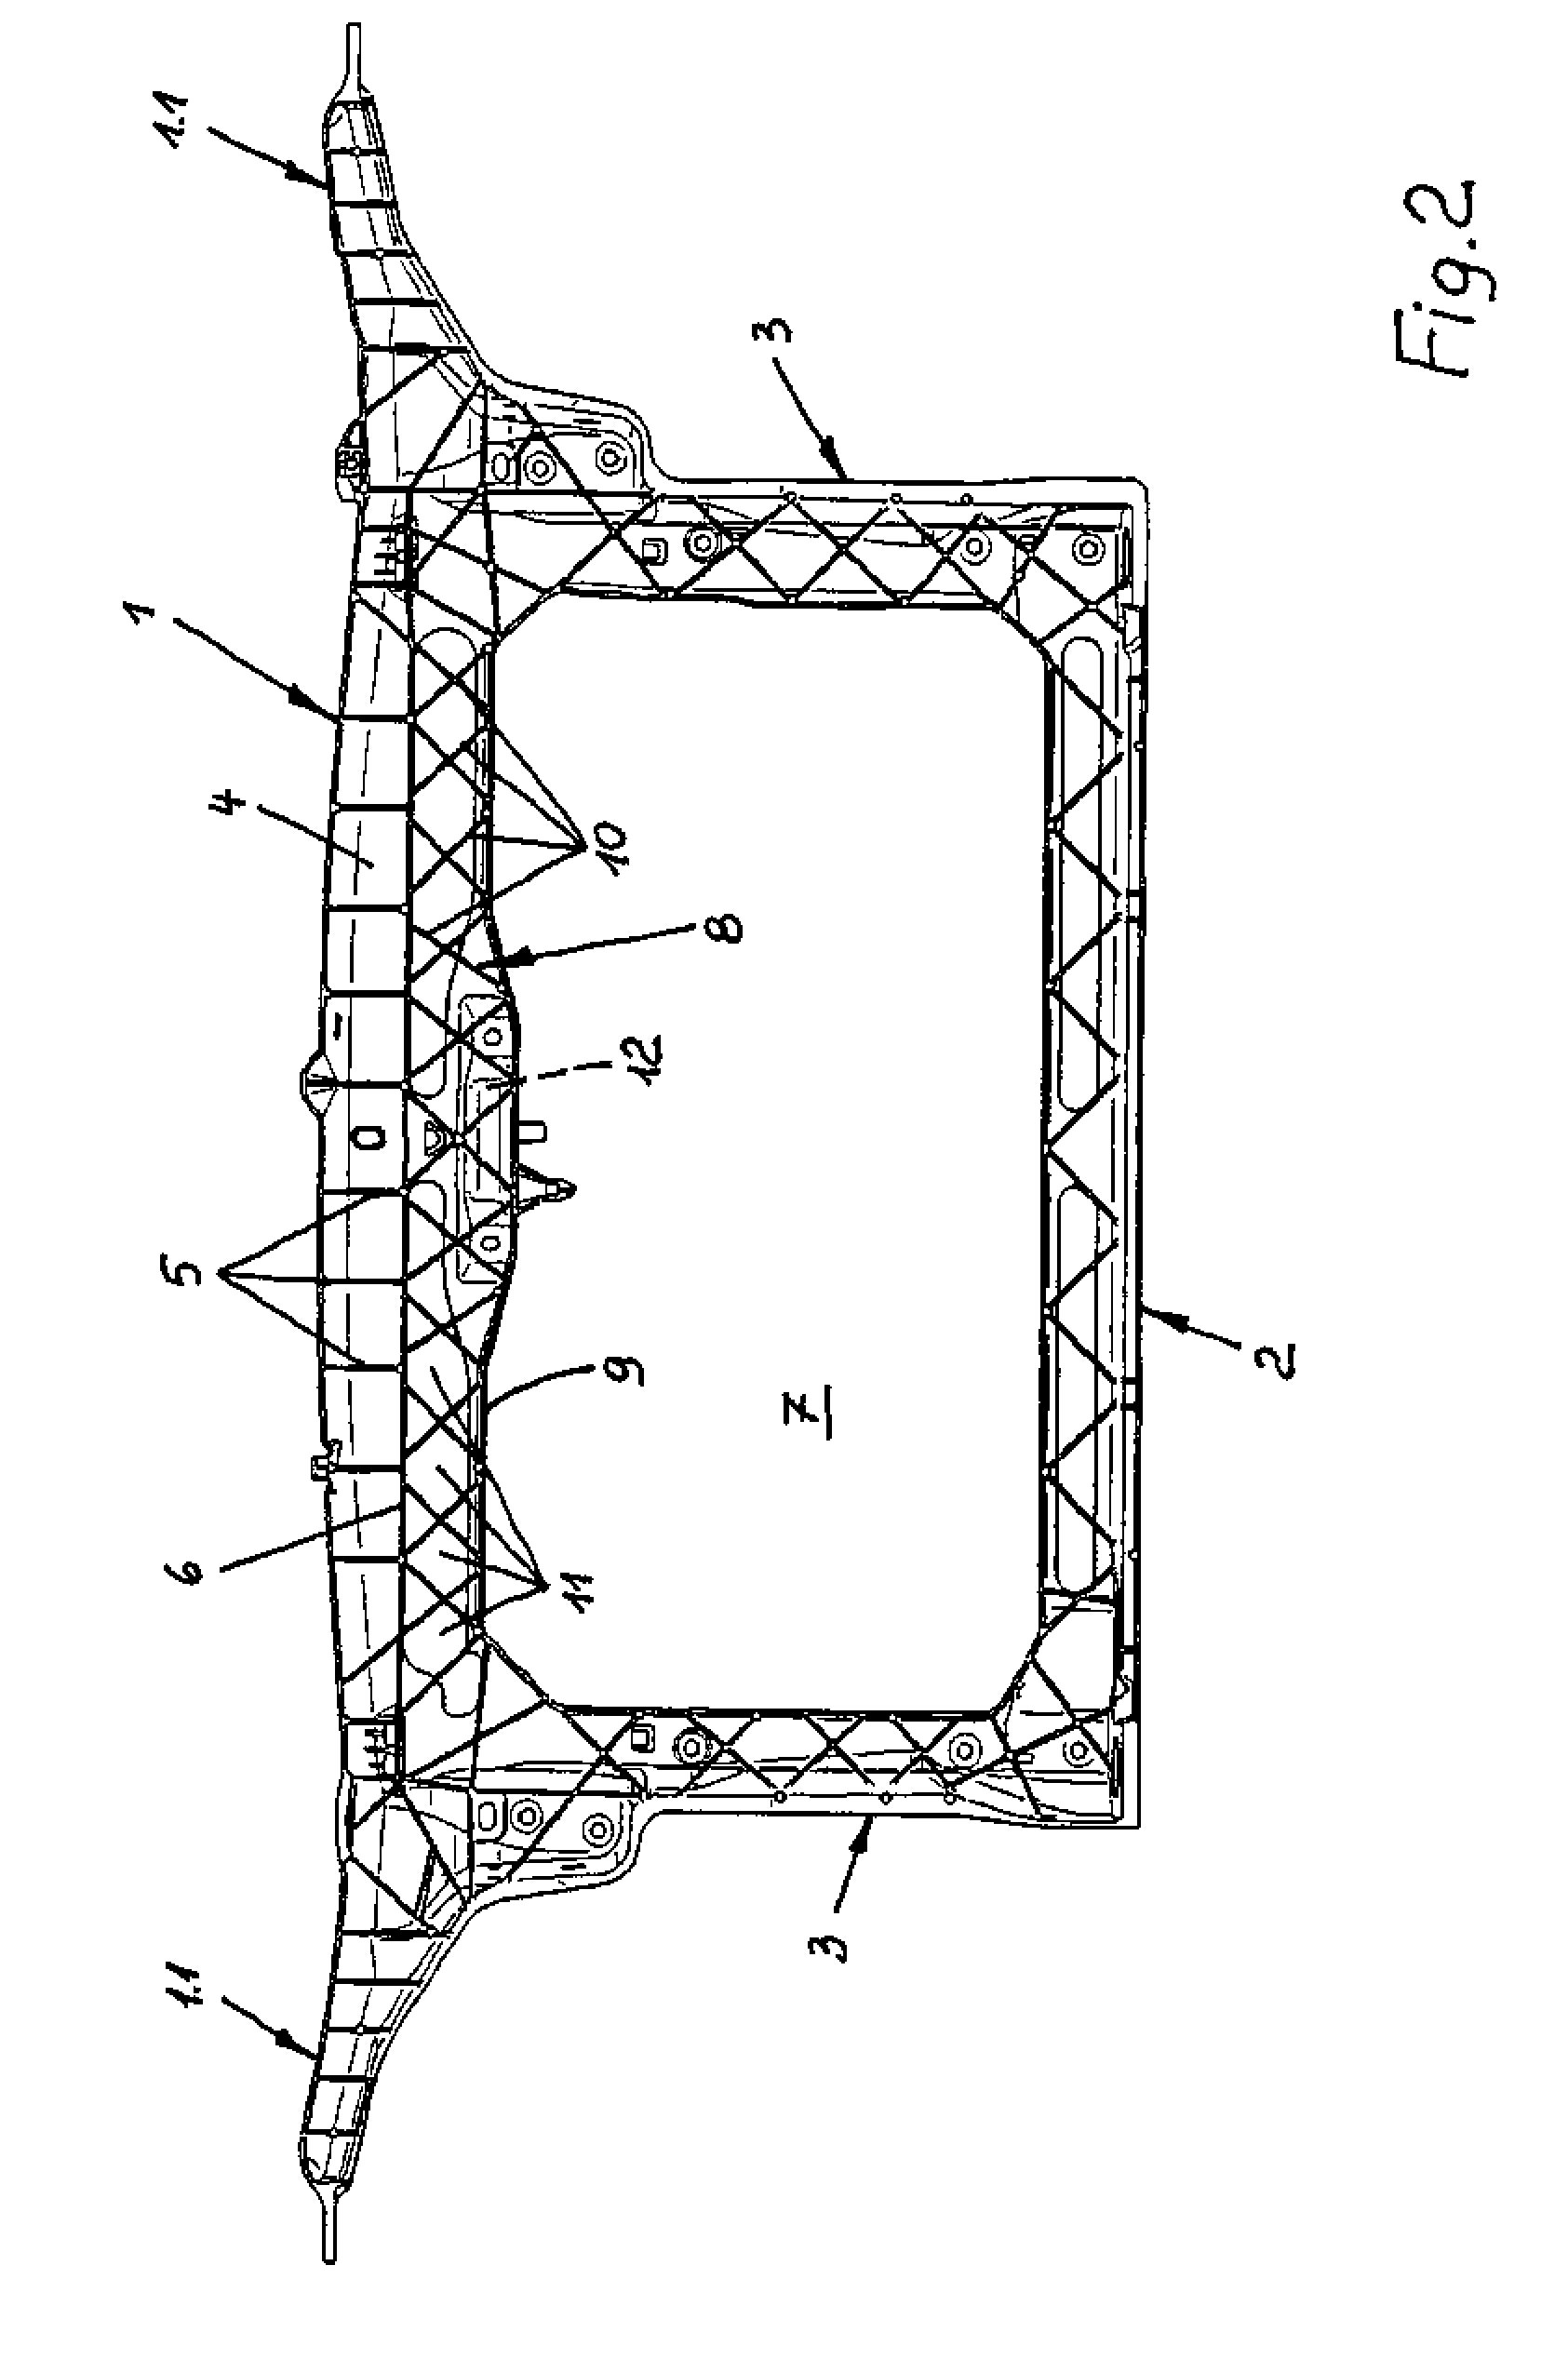 Mounting structure with a frame-shaped construction